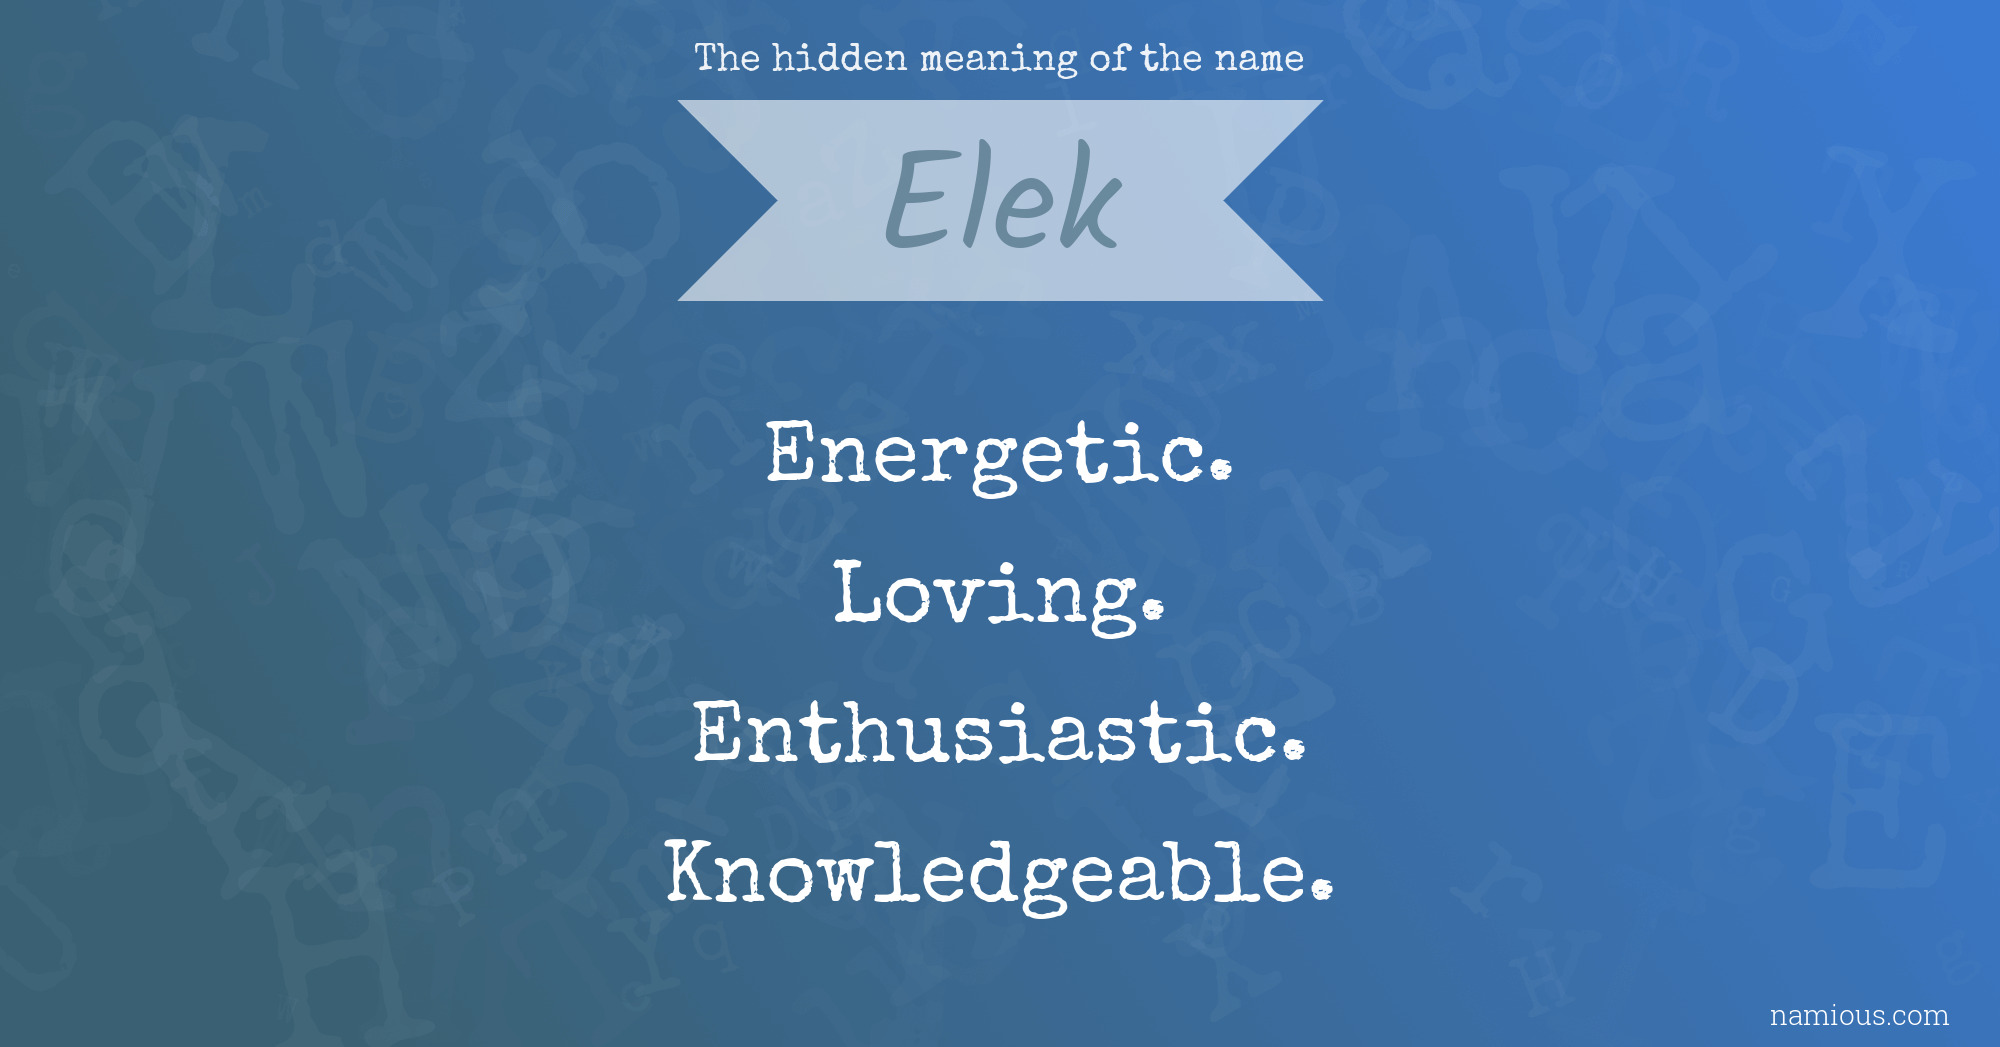 The hidden meaning of the name Elek